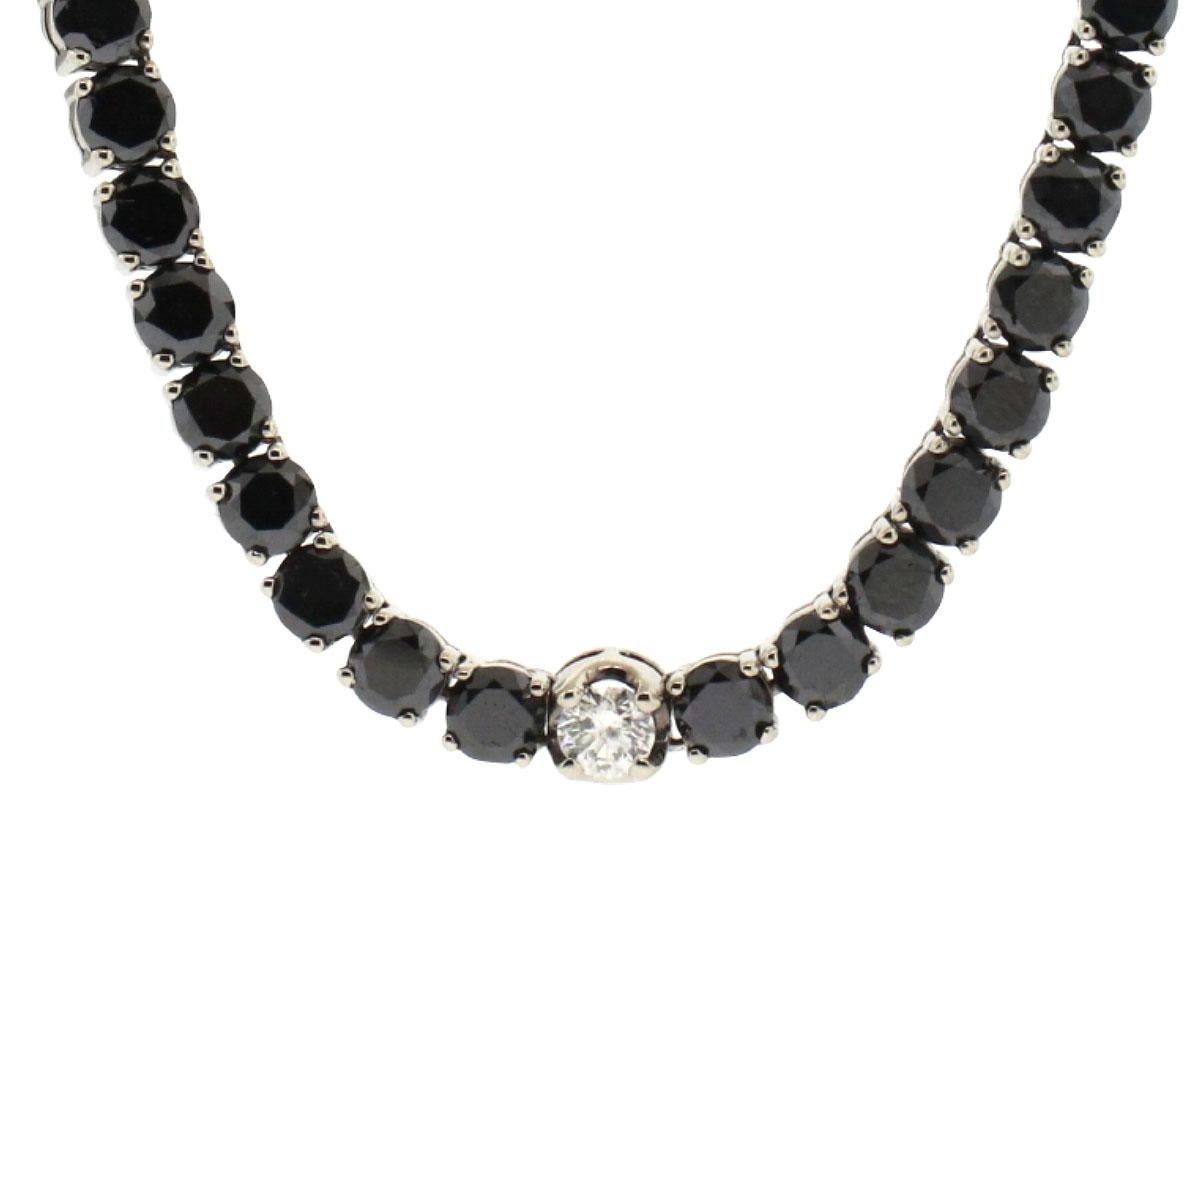 14k White Gold Black Round Diamond Tennis Necklace

Company: N/A

Style of jewelry: Black & White Diamond Tennis Necklace

Material: 14k white gold

Stones: Approximately 2ctw of Round cut Diamonds and approximately 33ctw of round cut black